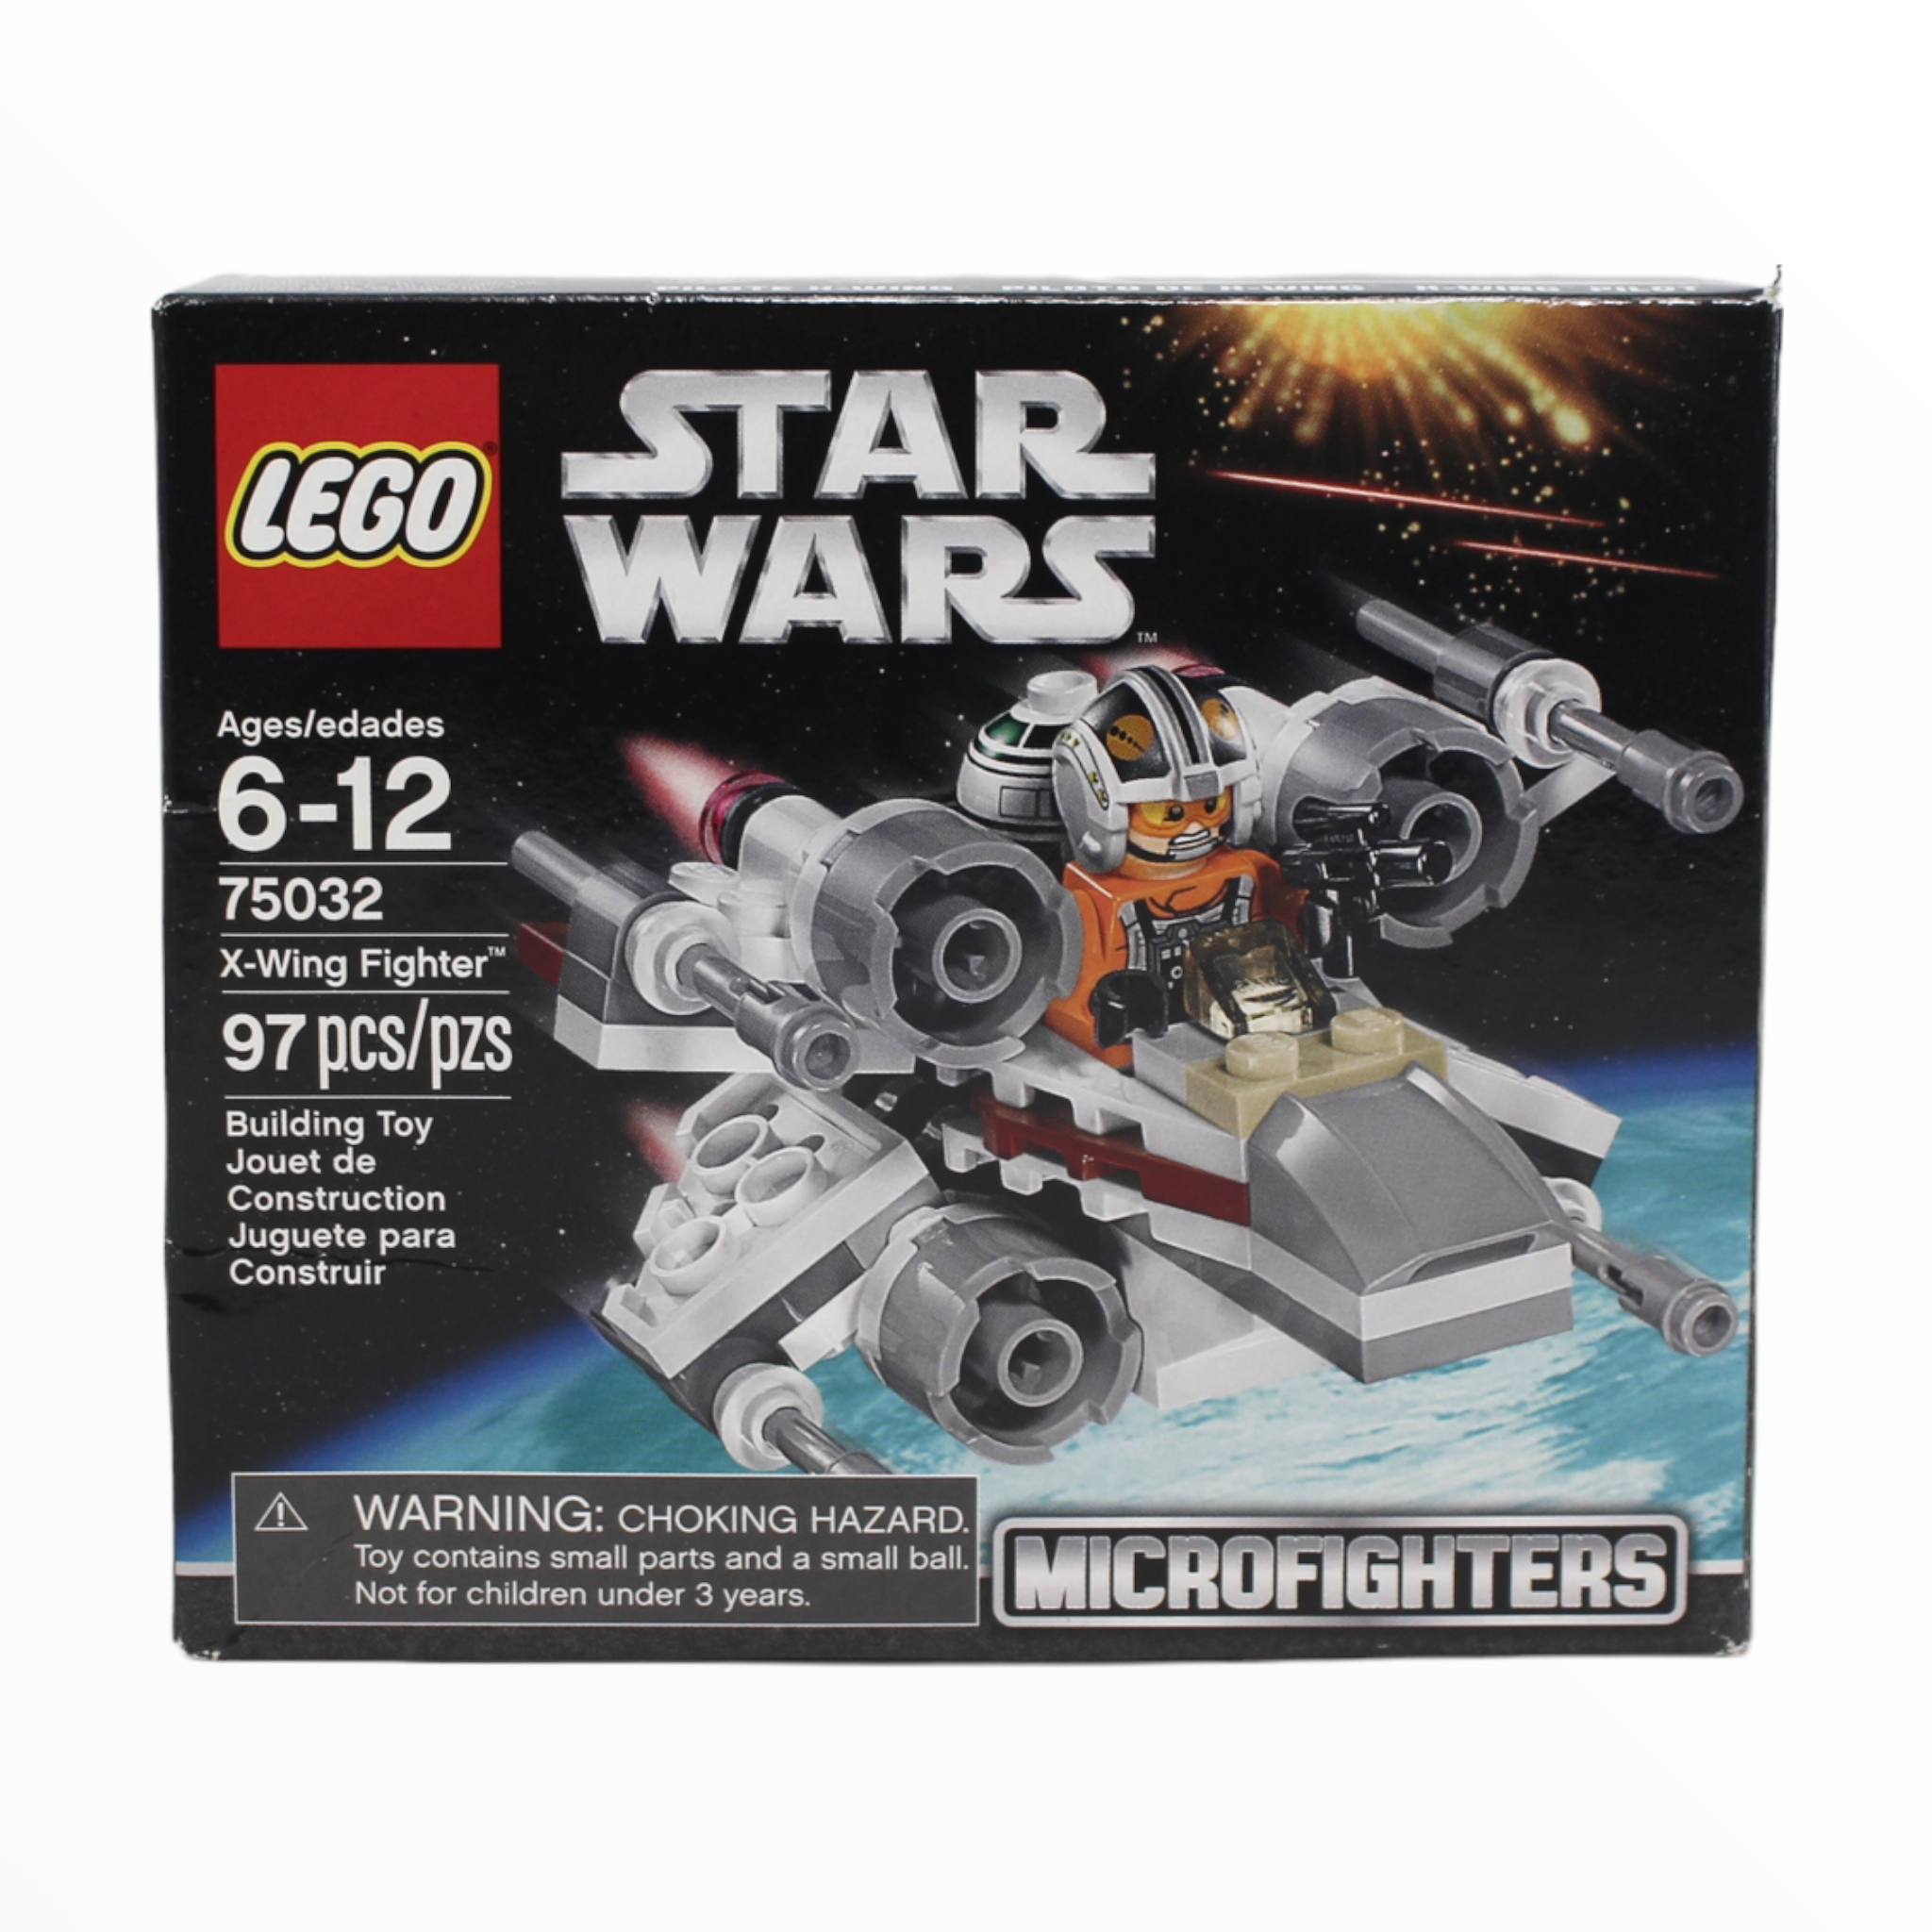 Certified Used Set 75032 Star Wars X-Wing Fighter Microfighter (2014)